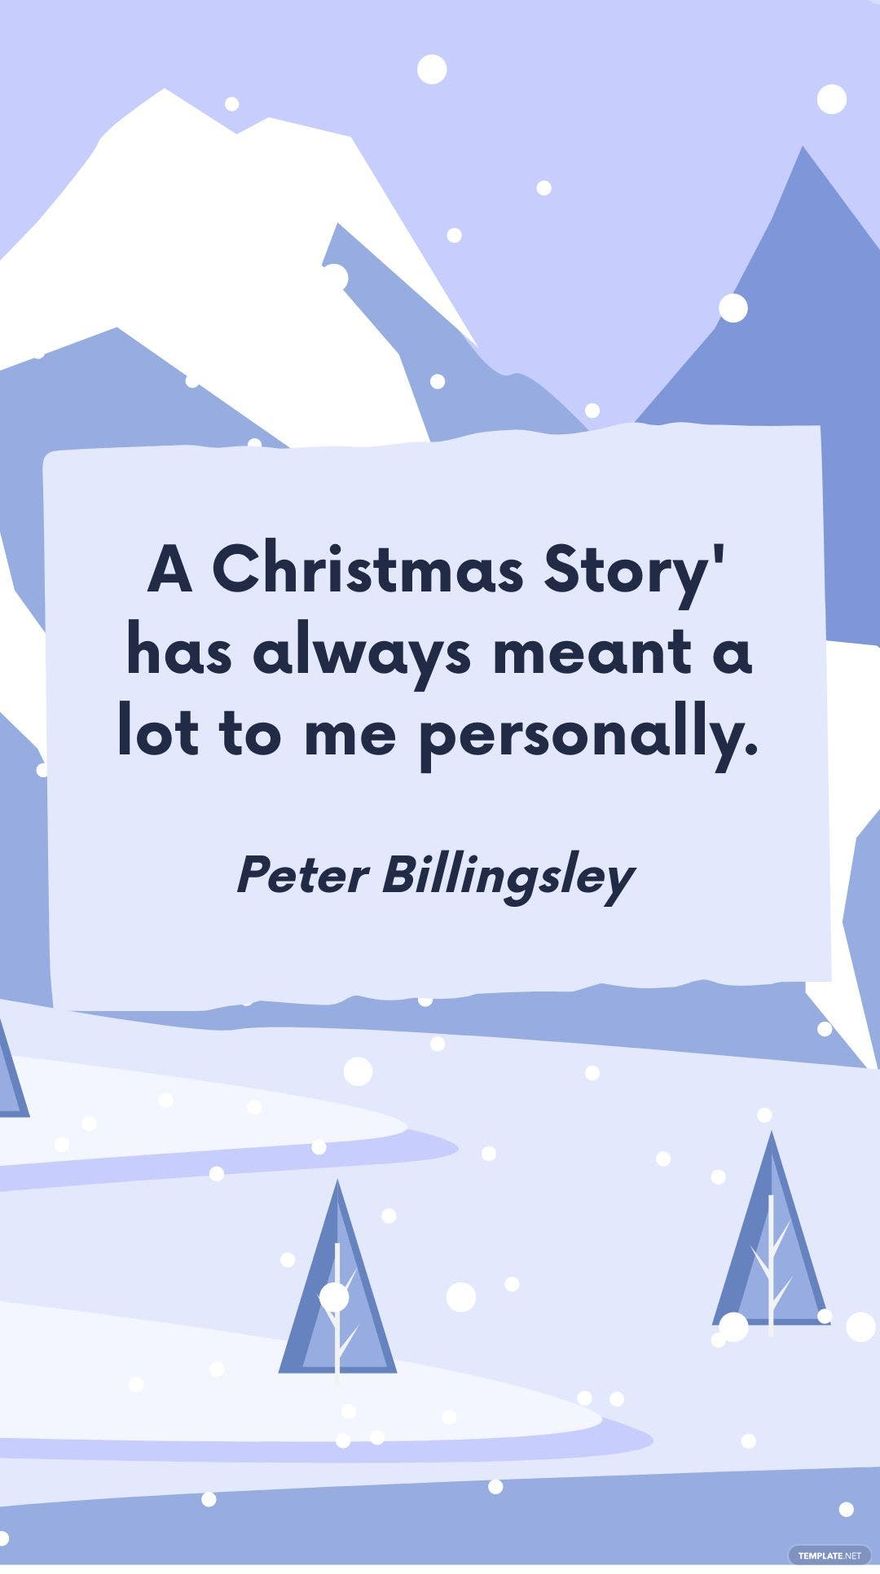 Free Peter Billingsley - A Christmas Story' has always meant a lot to me personally. in JPG